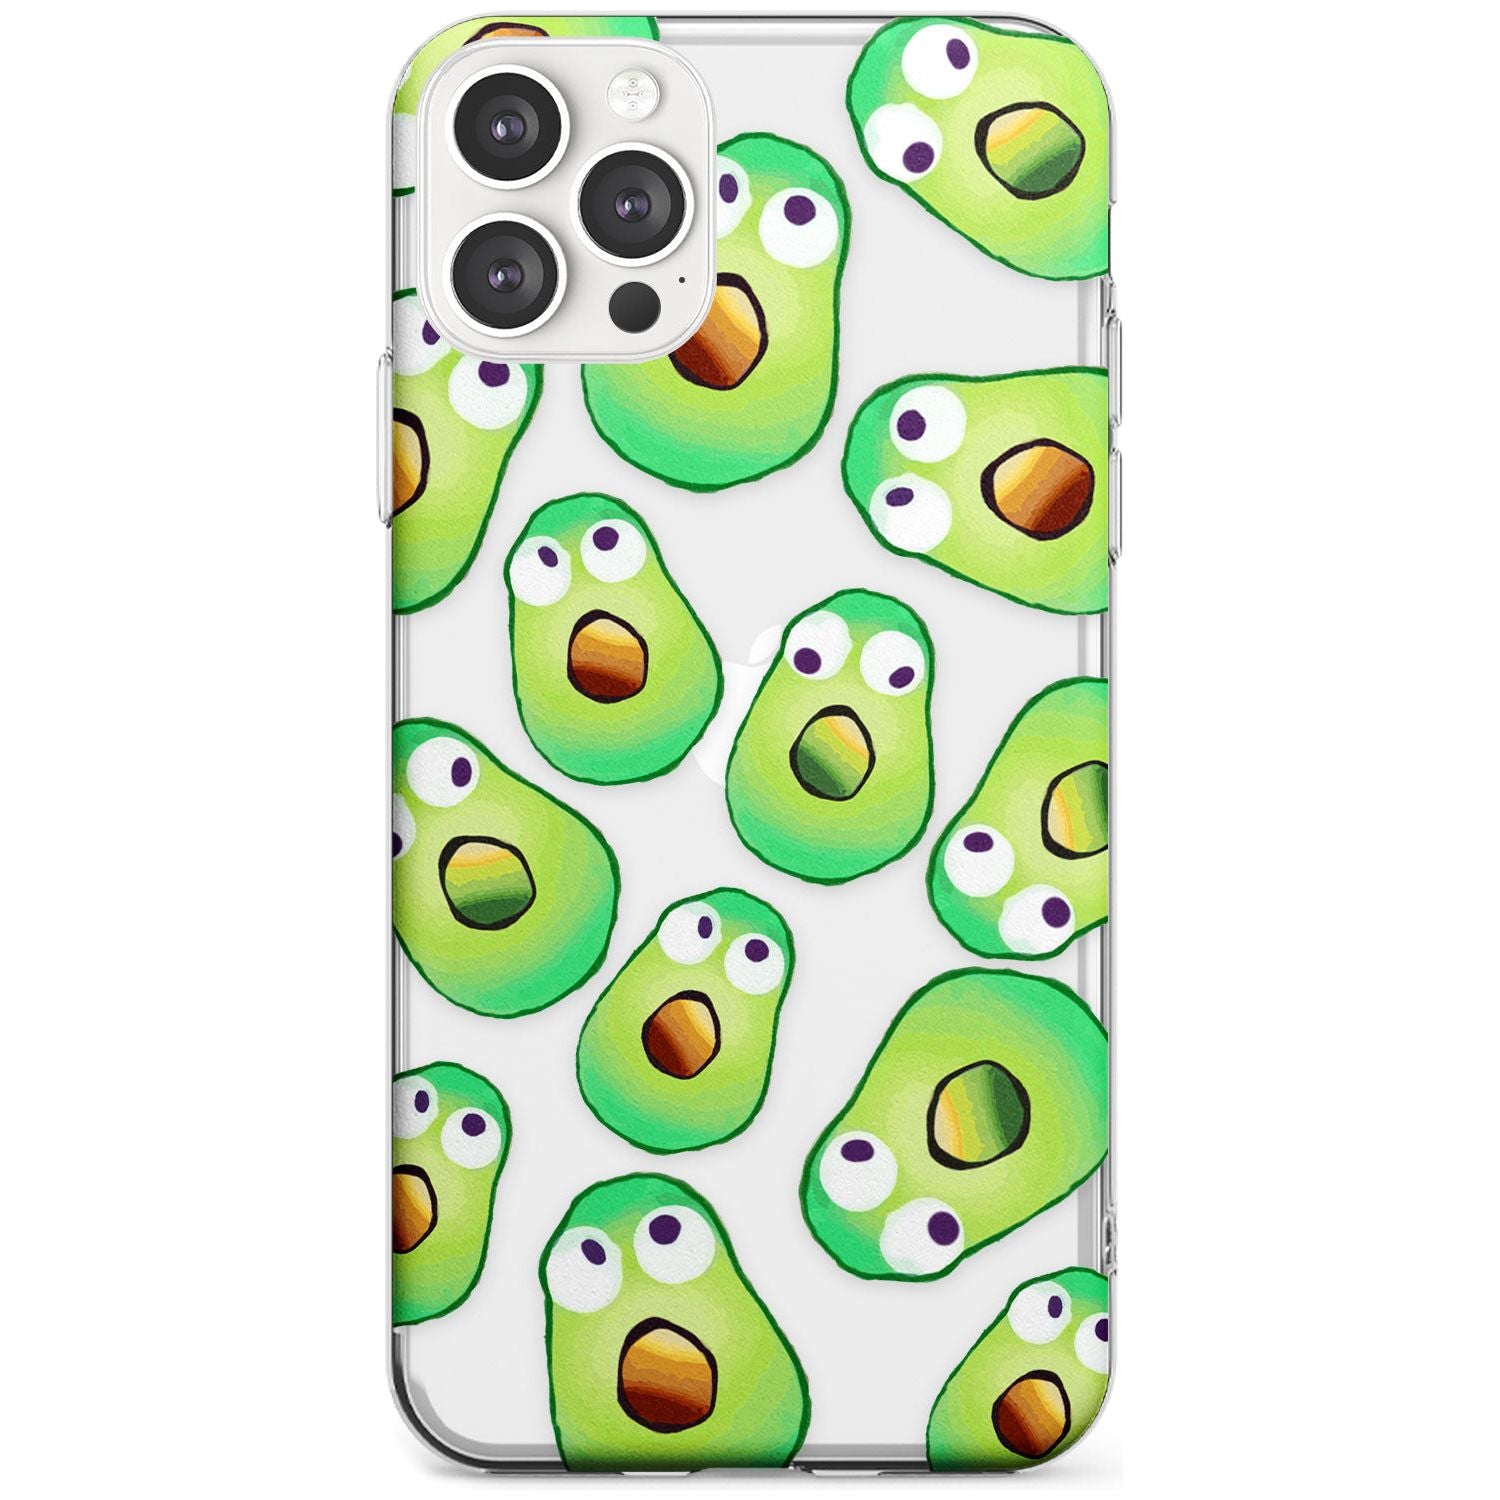 Shocked Avocados Slim TPU Phone Case for iPhone 11 Pro Max